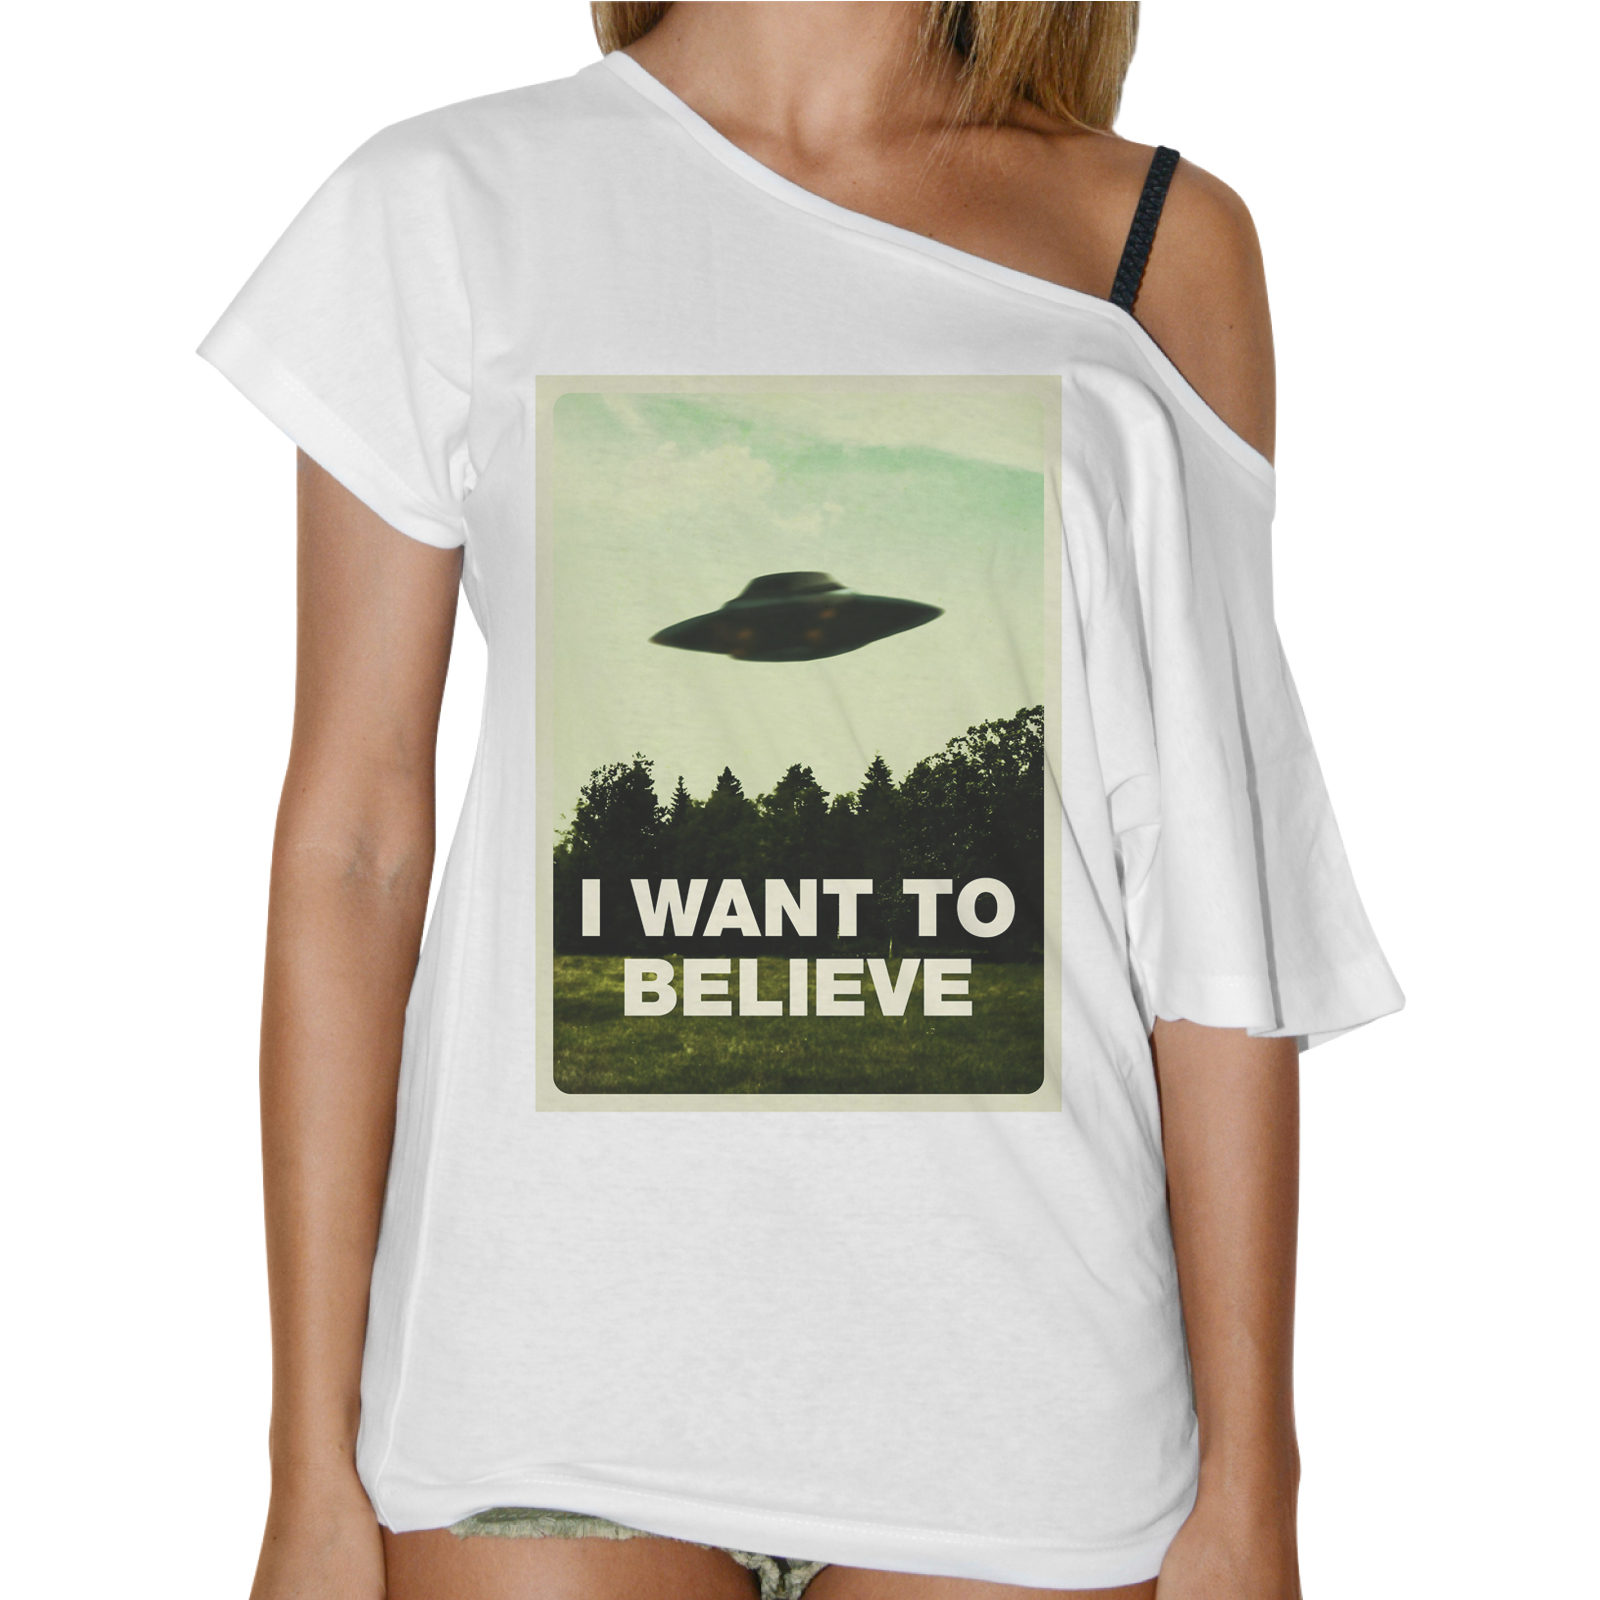 T-Shirt Donna Collo Barca I WANT BELIEVE